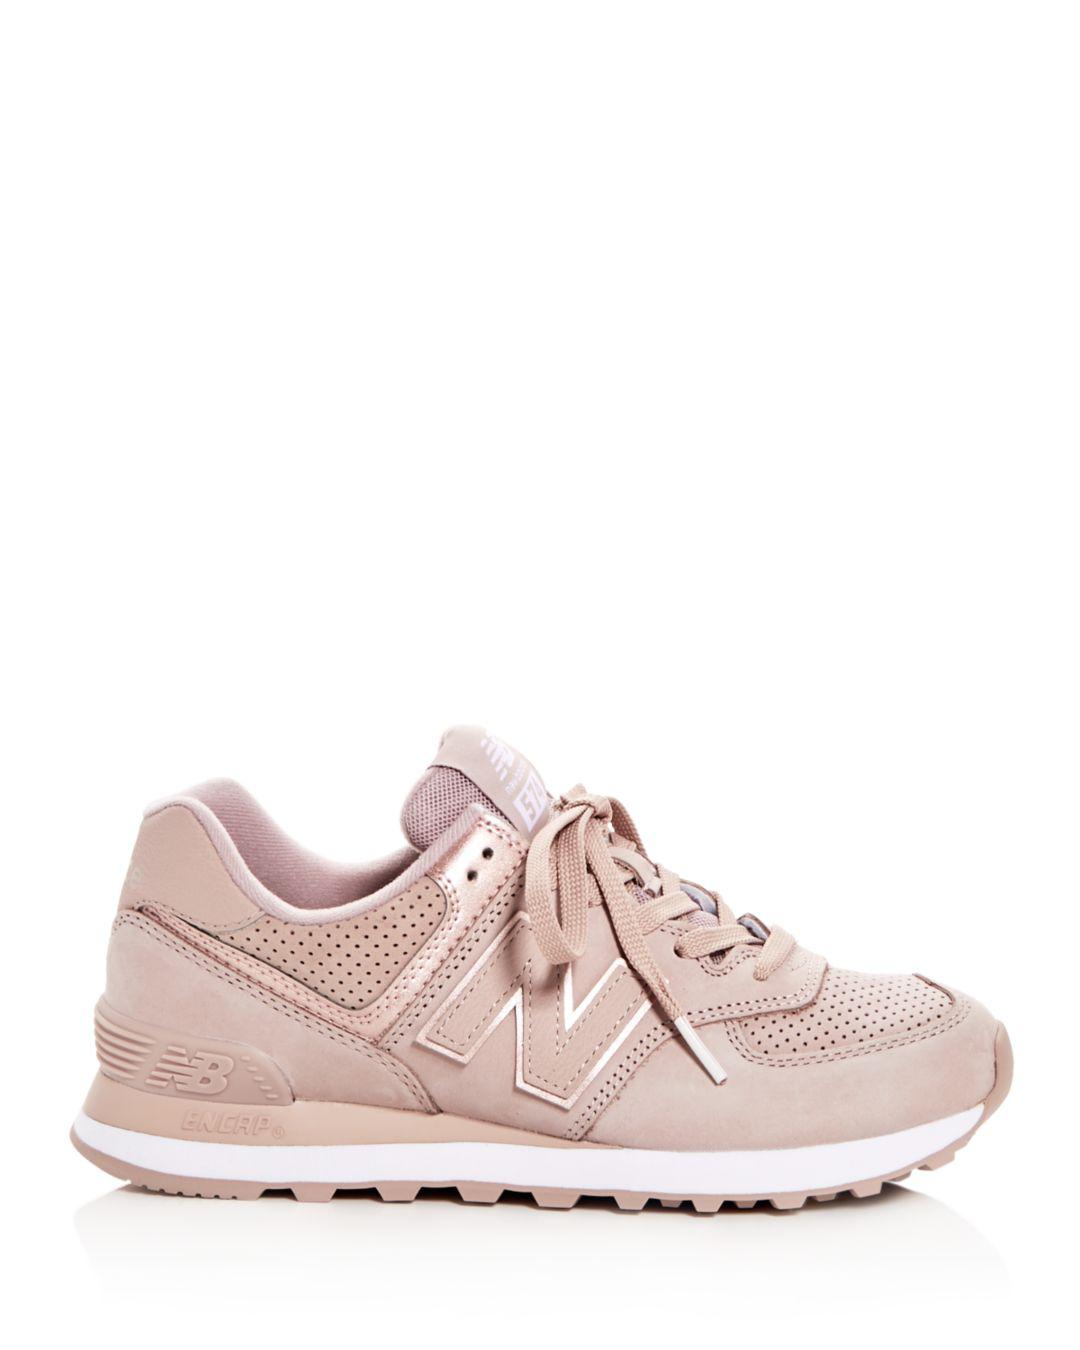 New Balance Women's 574 Nubuck Leather Lace Up Sneakers in Pink | Lyst